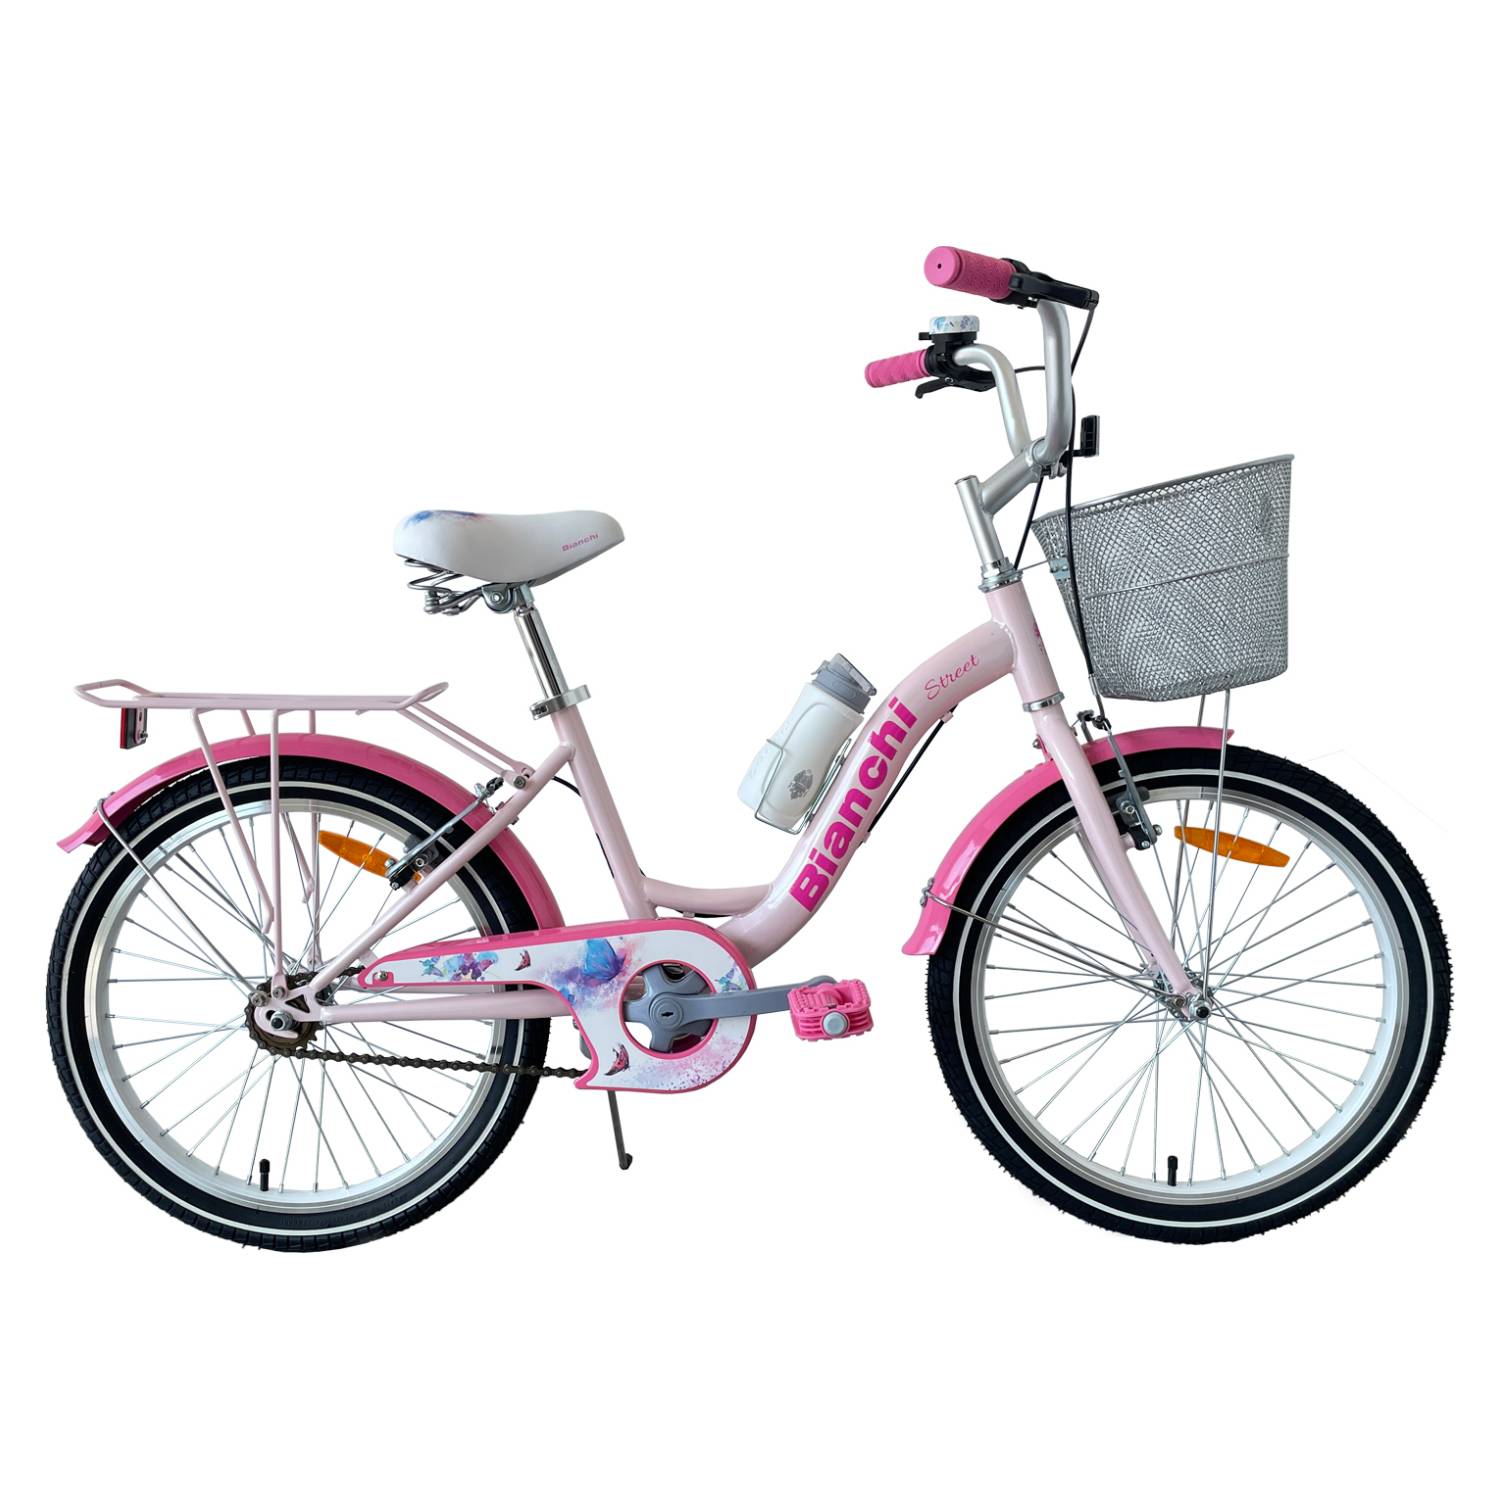 Bicicleta ChileCycles Paseo Aro 20 - ChileInflable